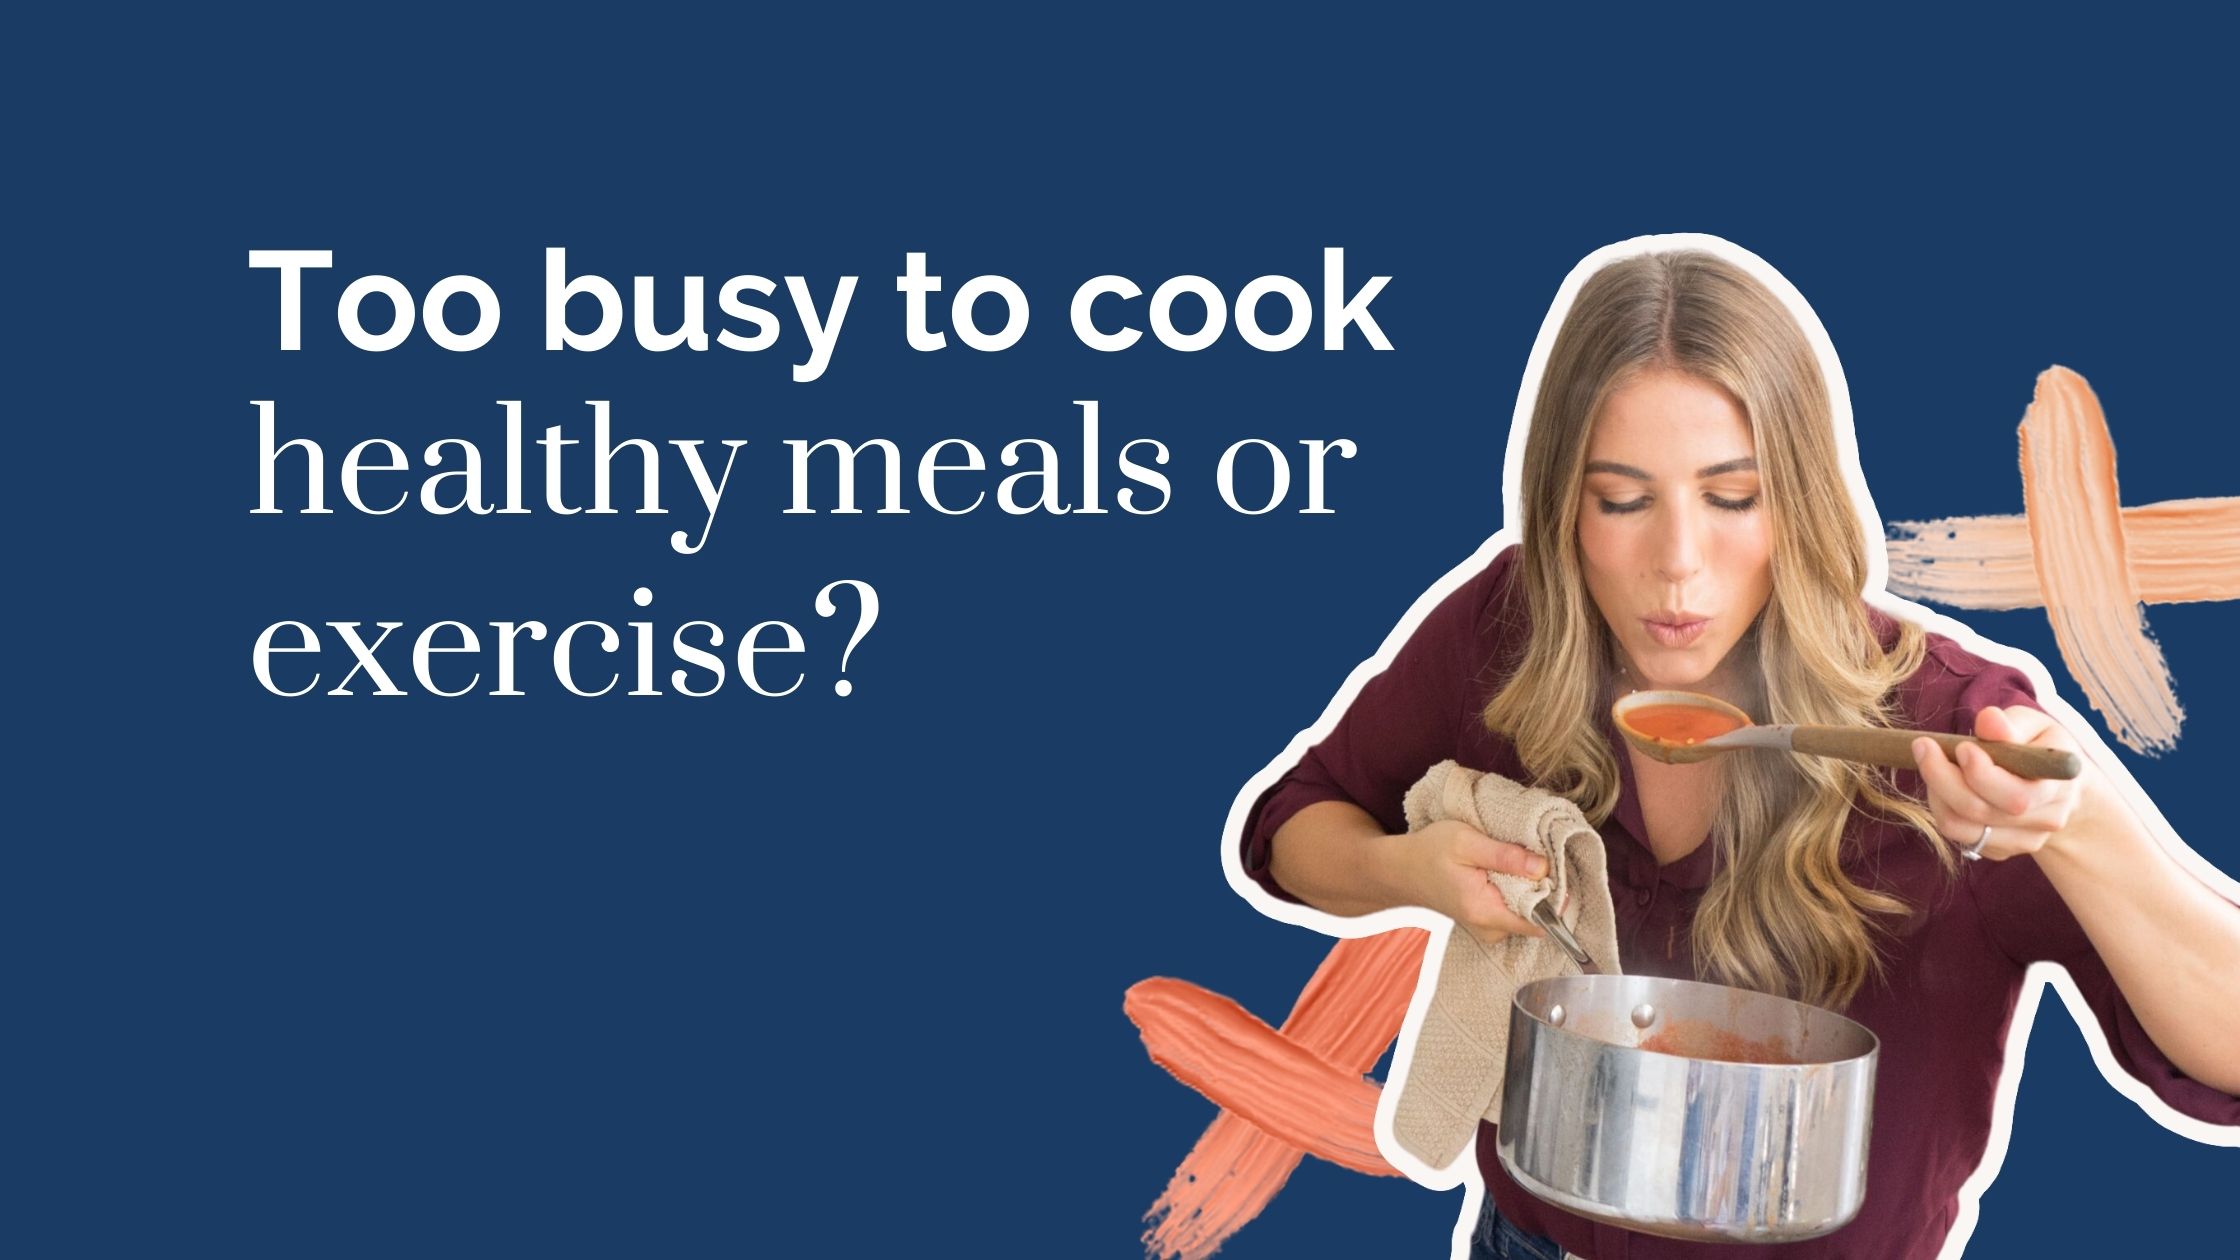 Find you’re too busy to cook healthy meals or exercise regularly? Image: Lyndi Cohen